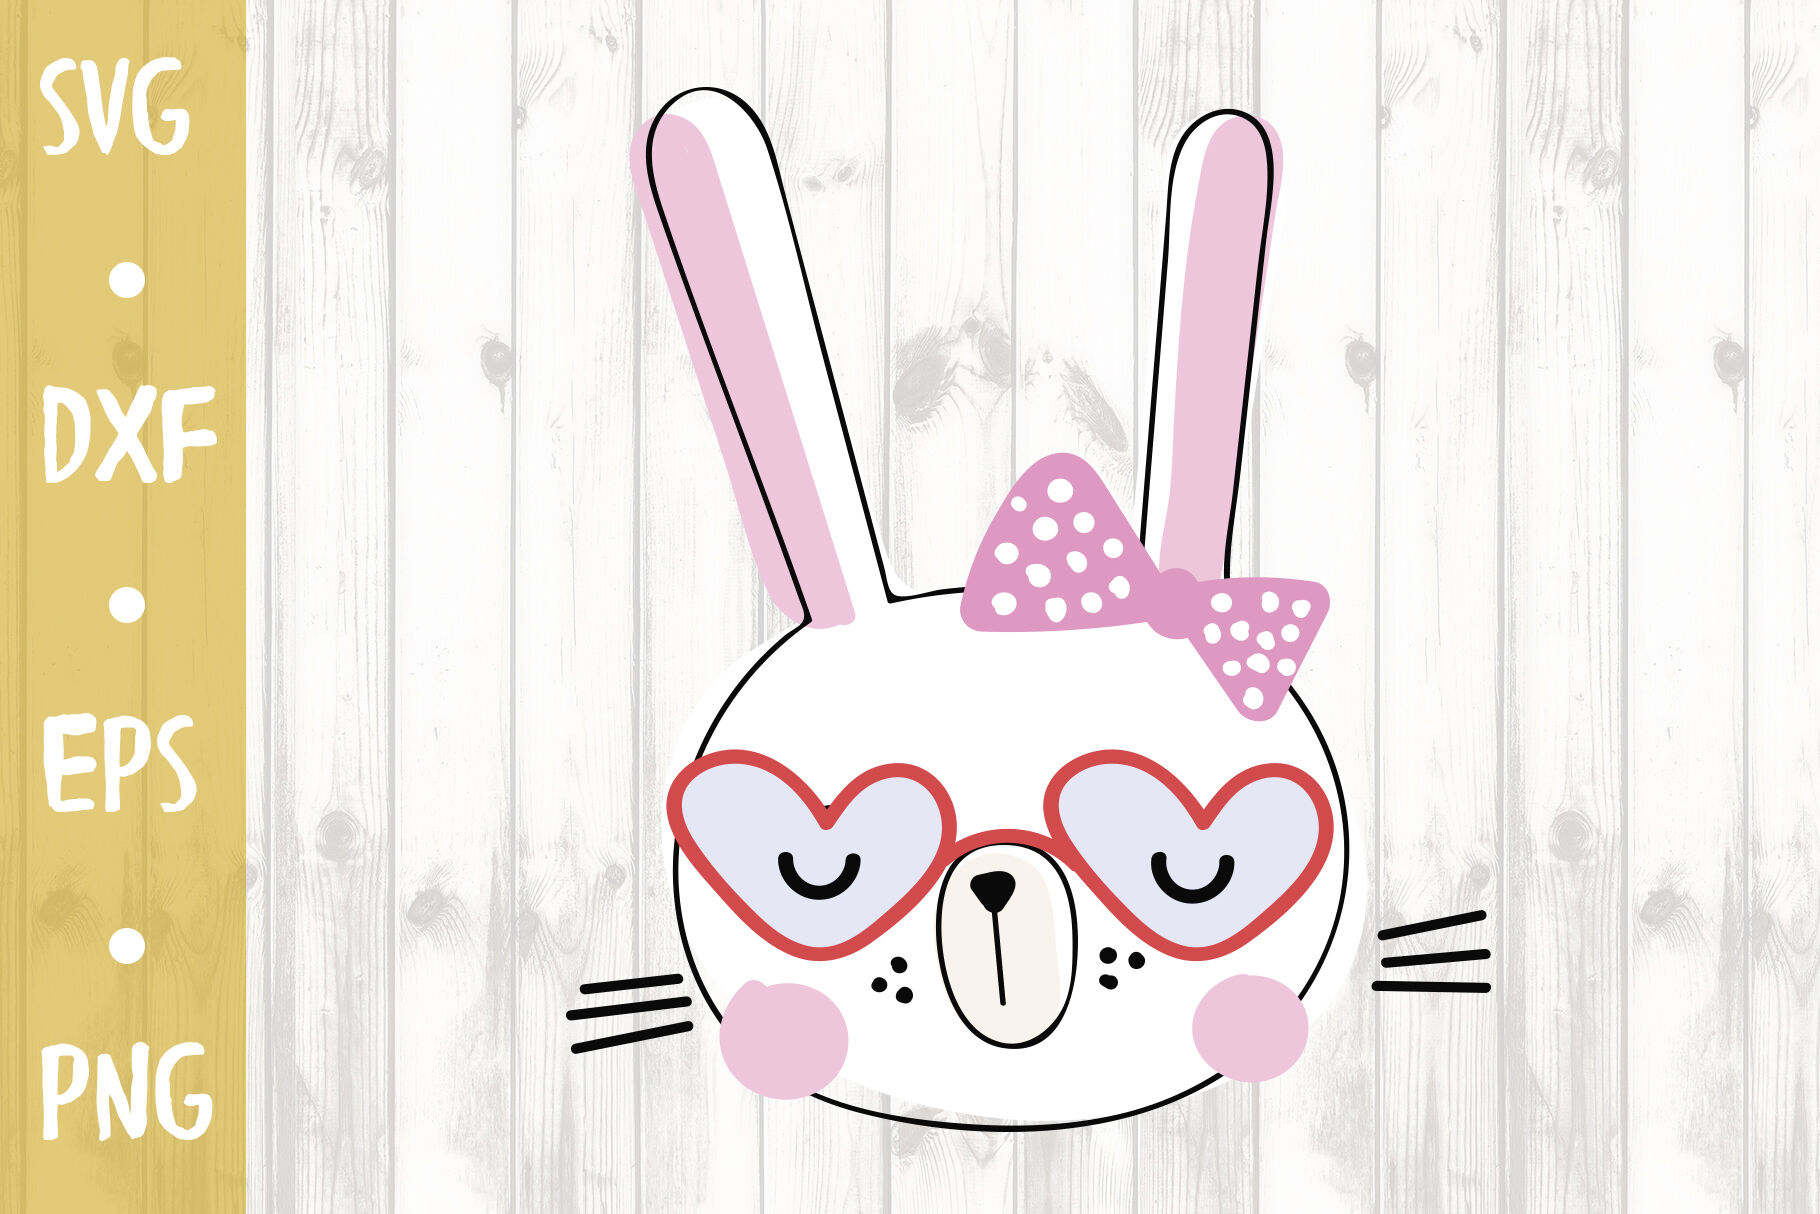 Download Cute Bunny - SVG CUT FILE By Milkimil | TheHungryJPEG.com